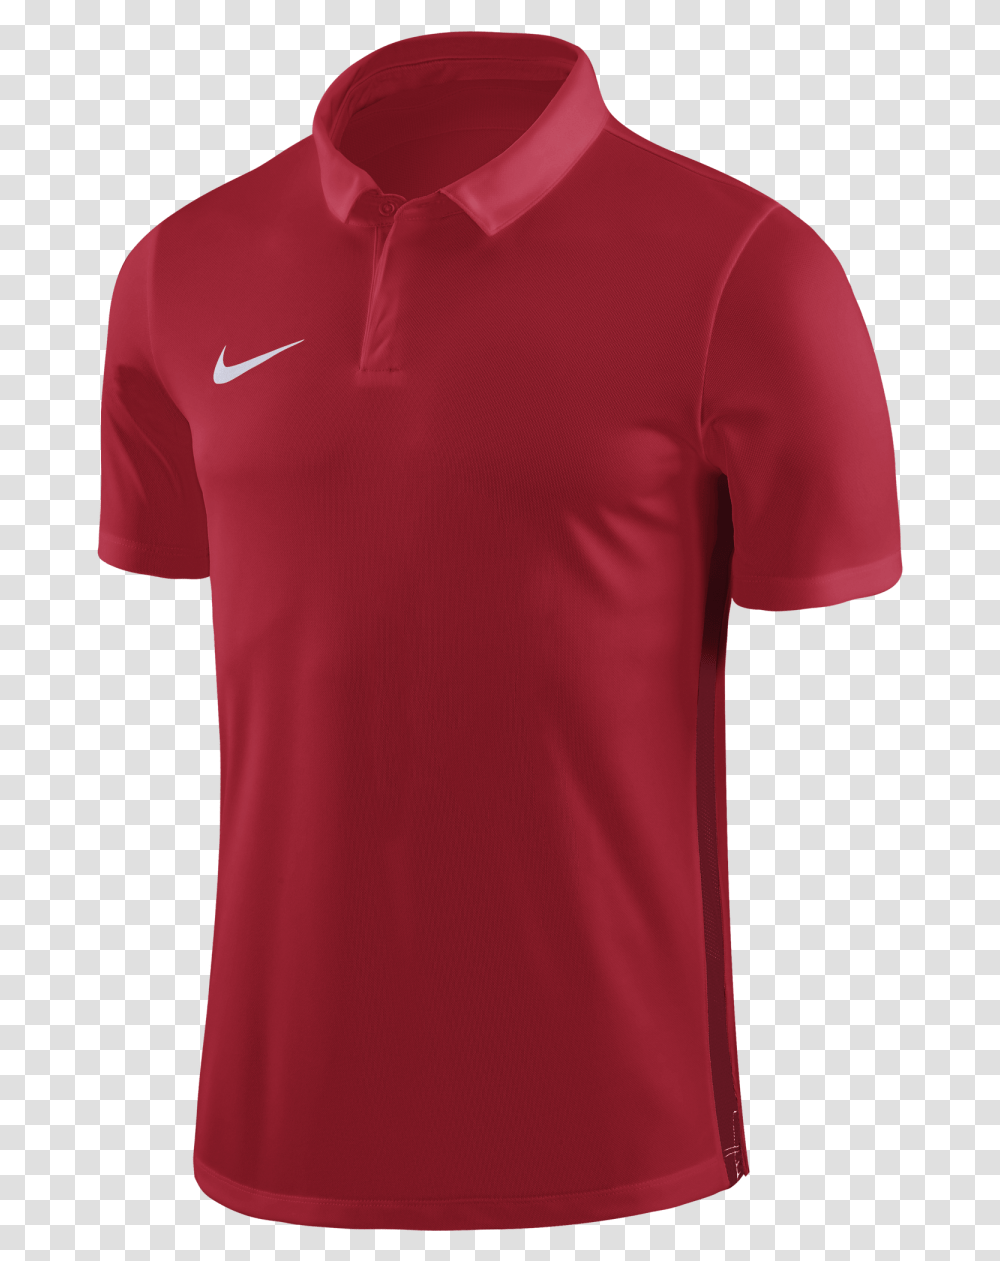 Academy 18 Polo Shirt Nike Football Academy 18 Range 4sports Group, Clothing, Apparel, Jersey, T-Shirt Transparent Png